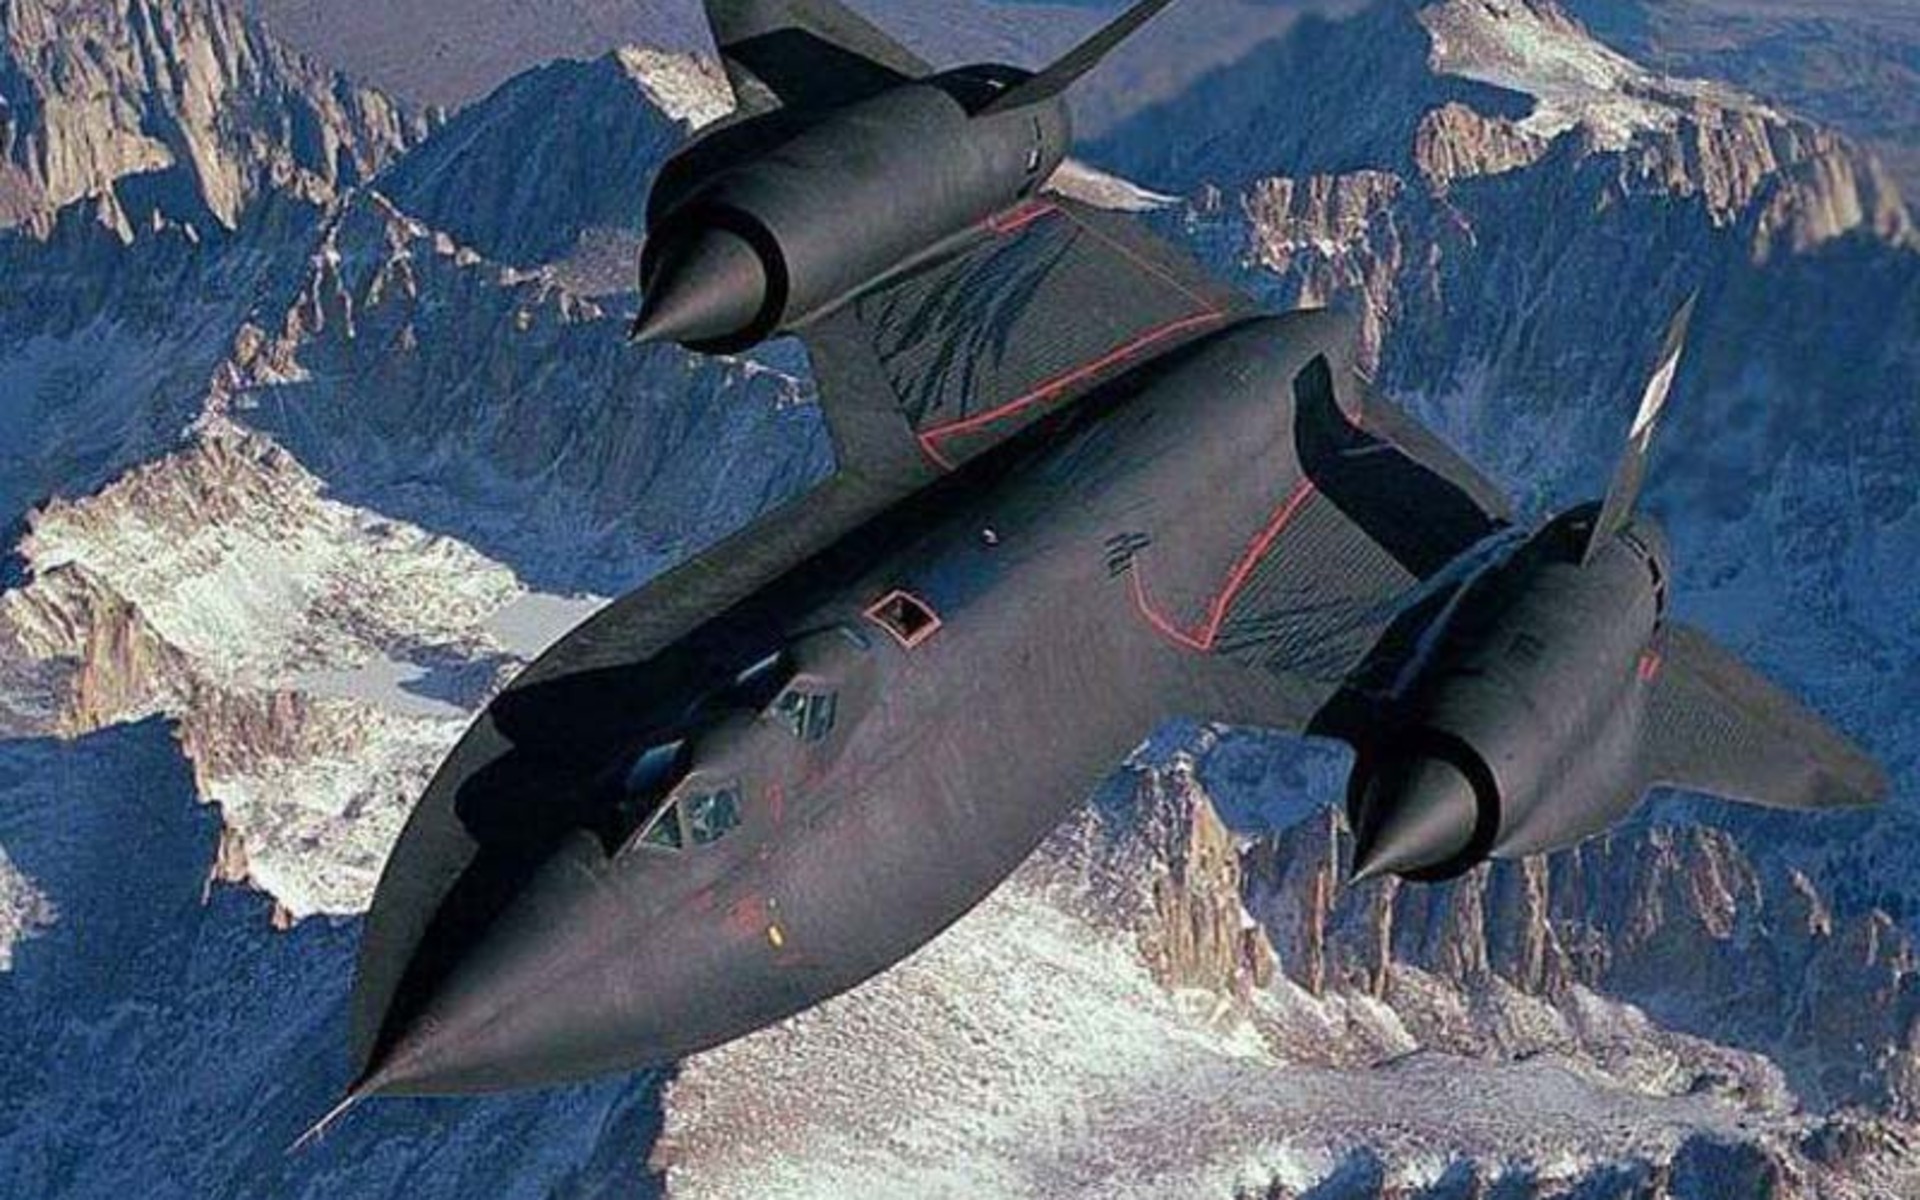 The USAF Lockheed SR-71 'Blackbird', a reconnaissance aircraft, is the world's fastest non-experimental jet aeroplane, with a top speed in excess of Mach 3.